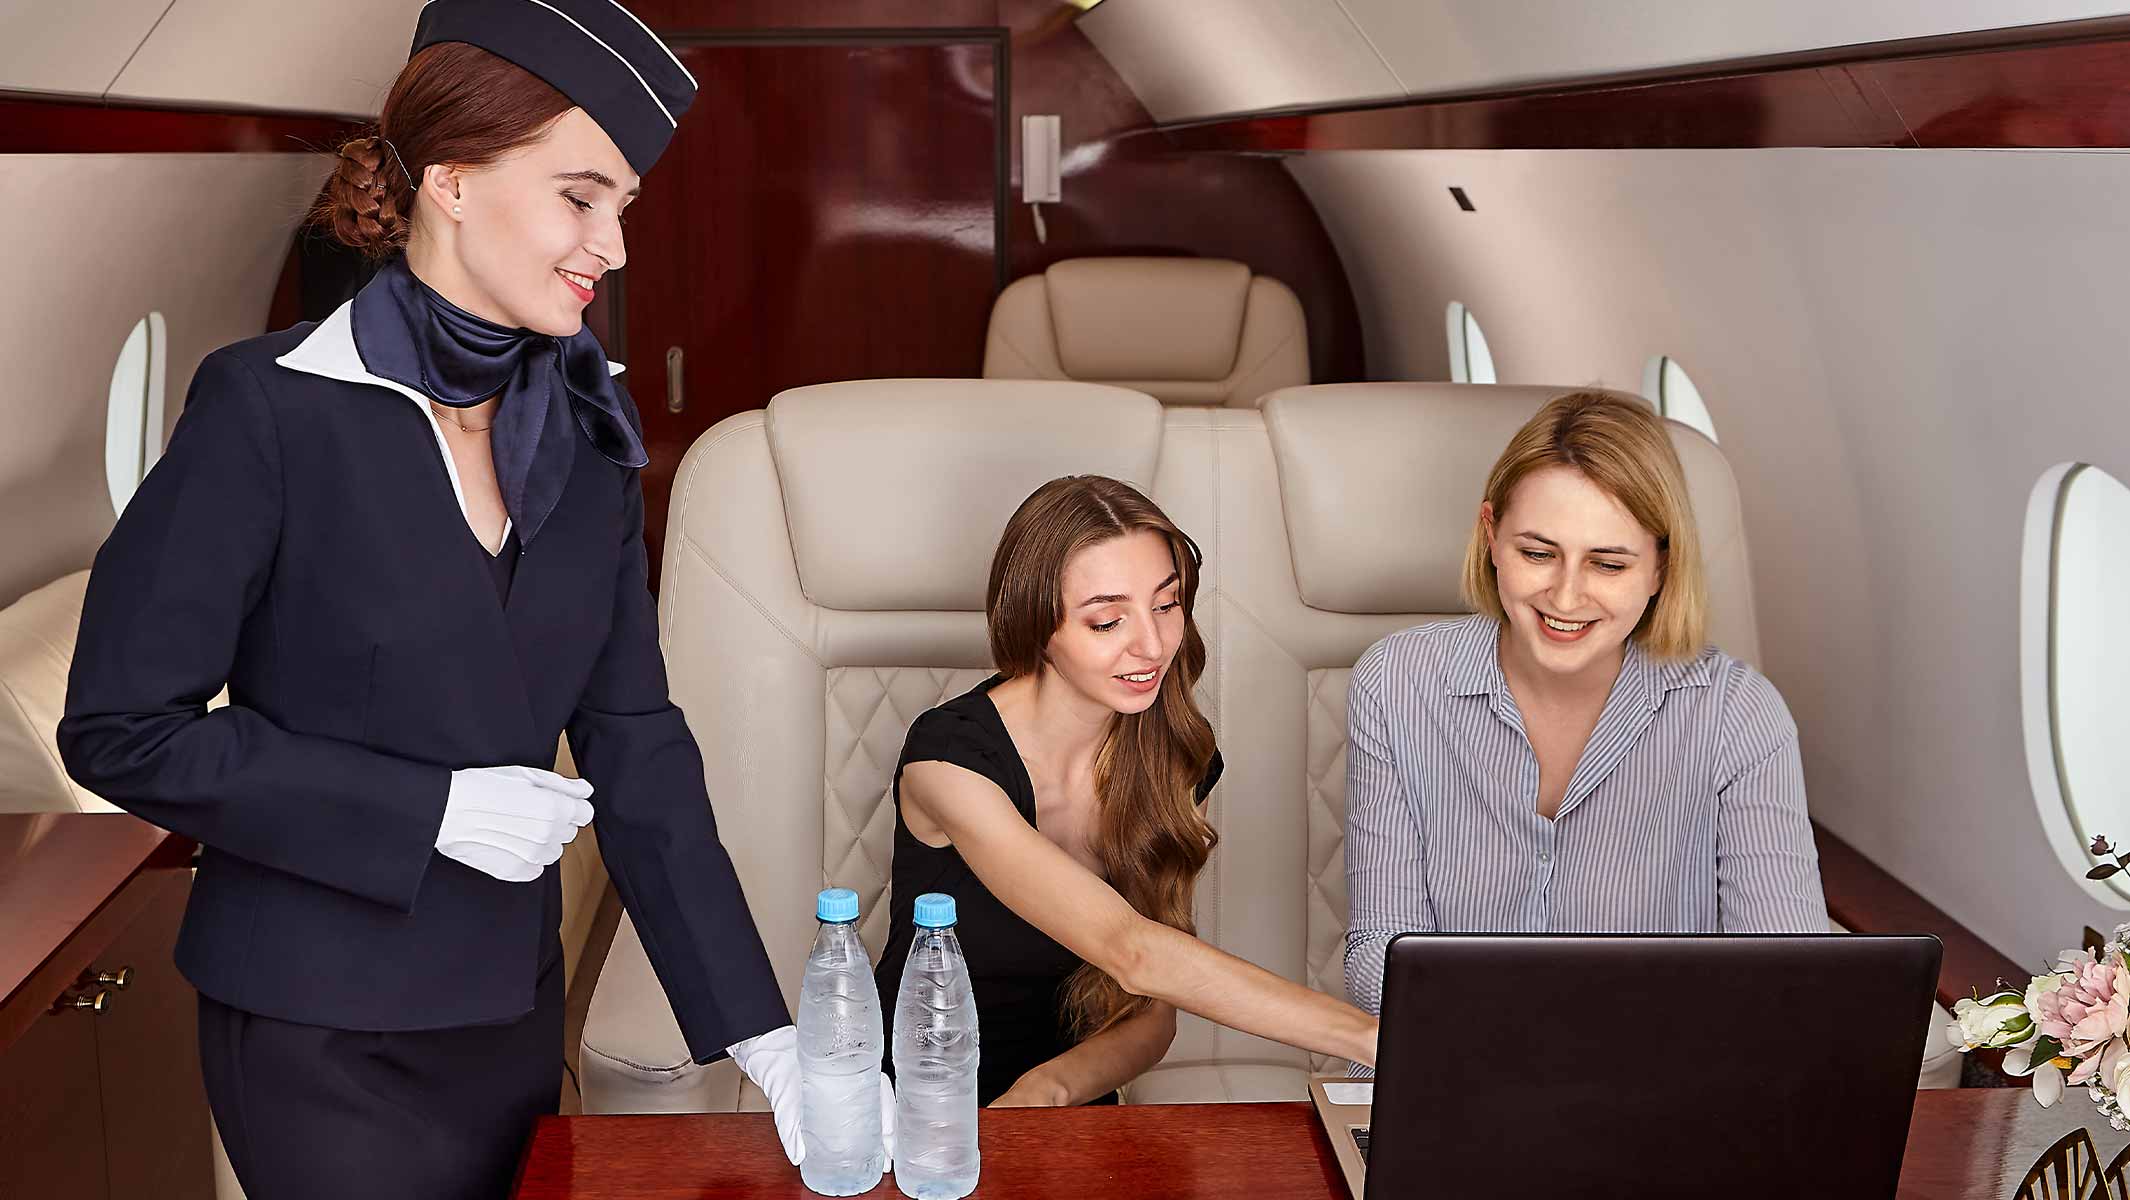 SLJ - Starr Luxury Jets, Live the Platinum -Hire a Private Jet Experience -Menorca Airport, - Book your Private Jet in UK, Mayfair, Berkeley Square